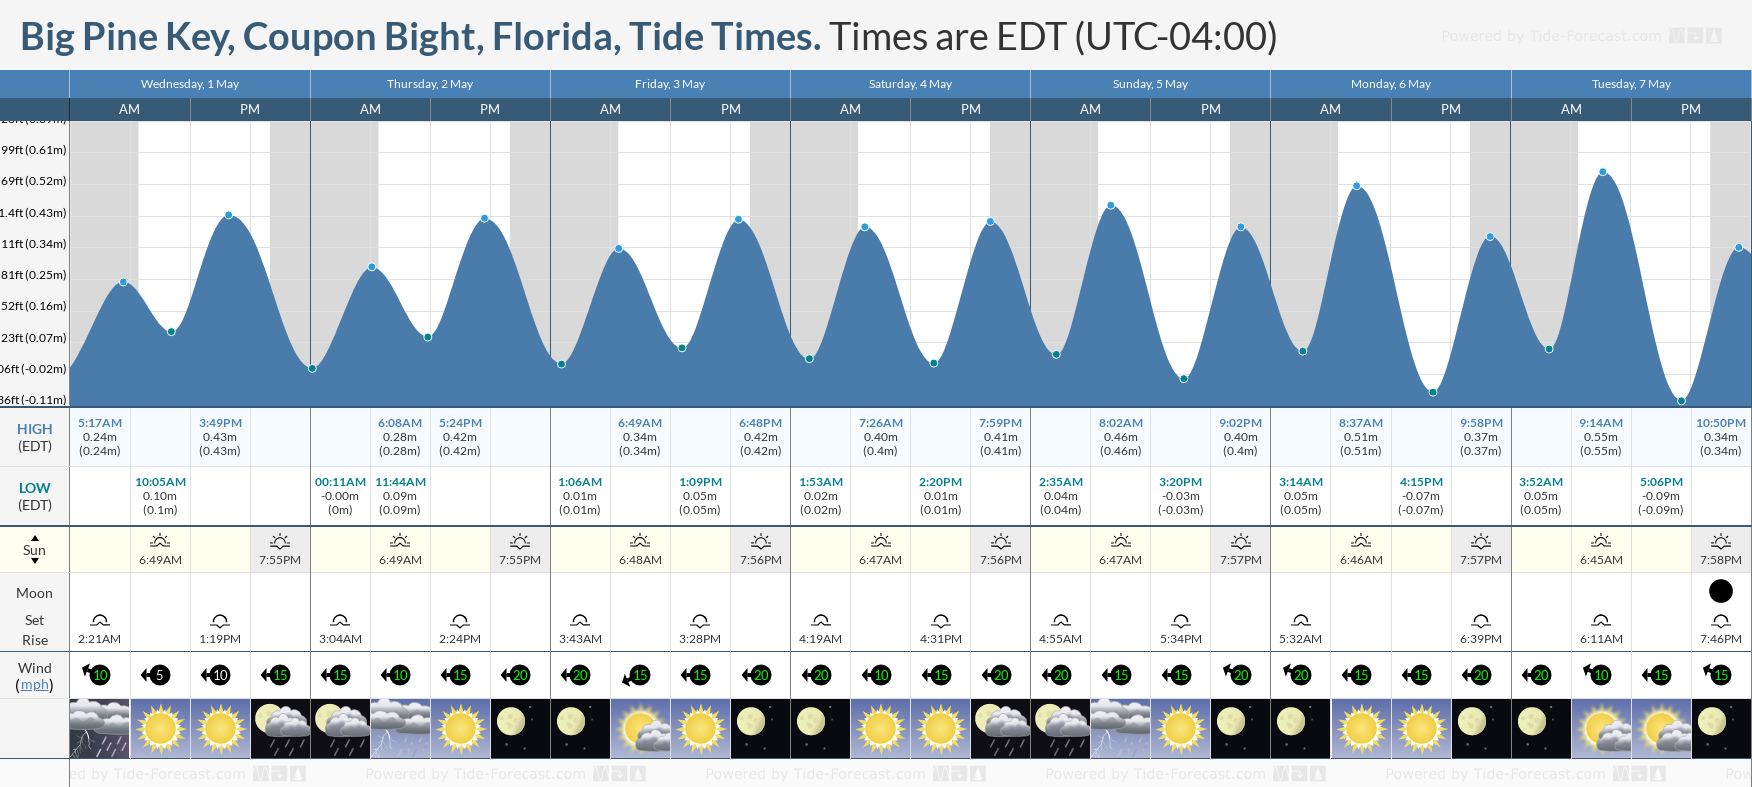 Big Pine Key, Coupon Bight, Florida Tide Chart including high and low tide times for the next 7 days